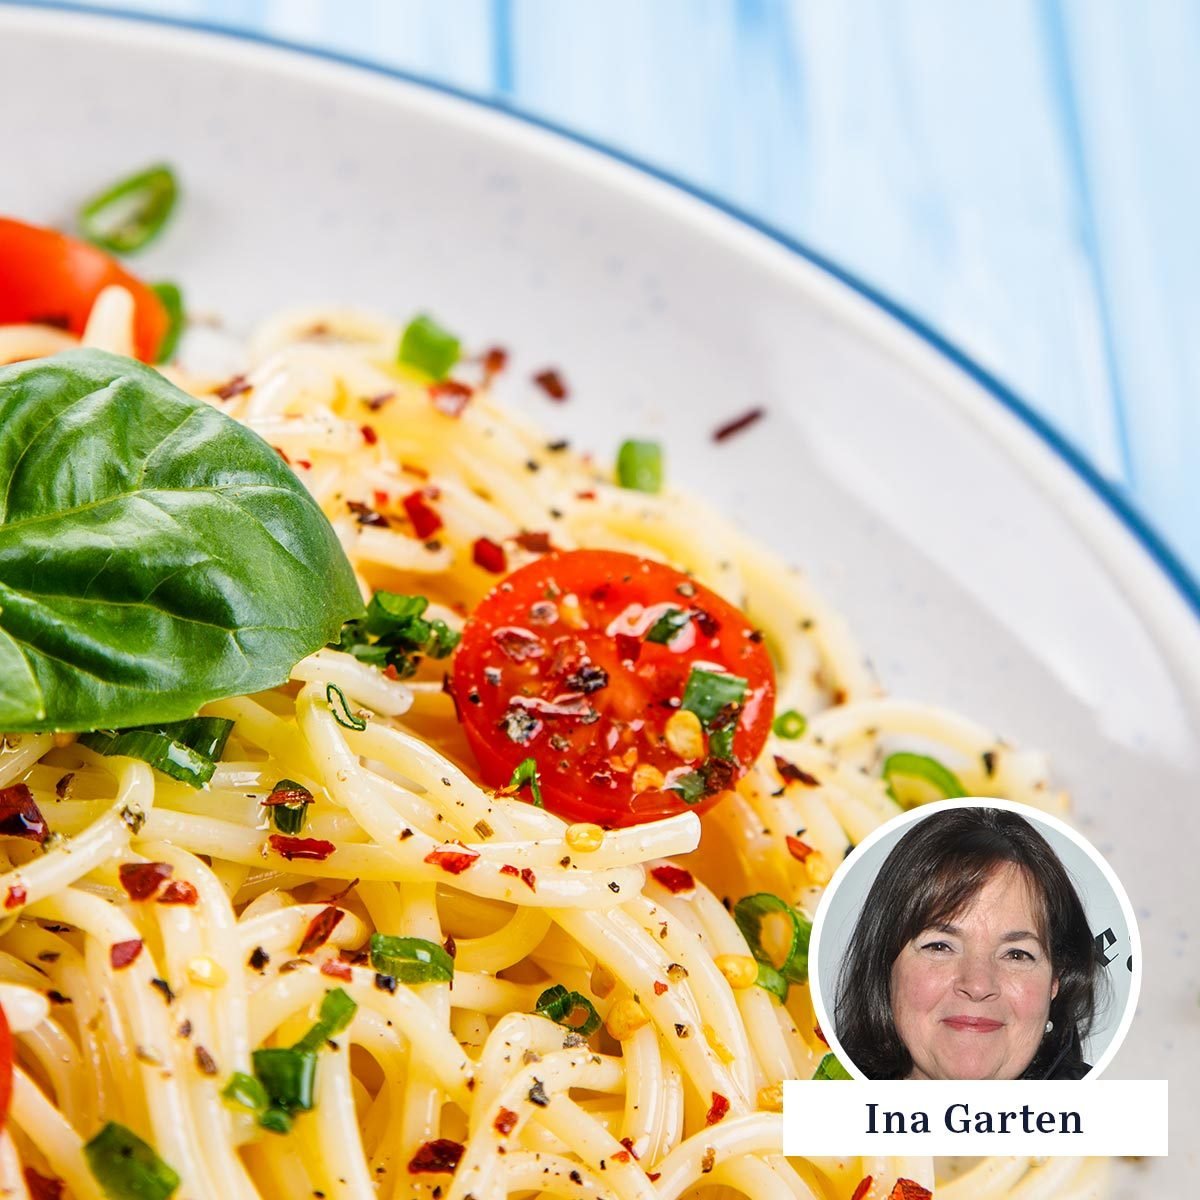 This summer pasta recipe from Ina Garten is easy and delicious